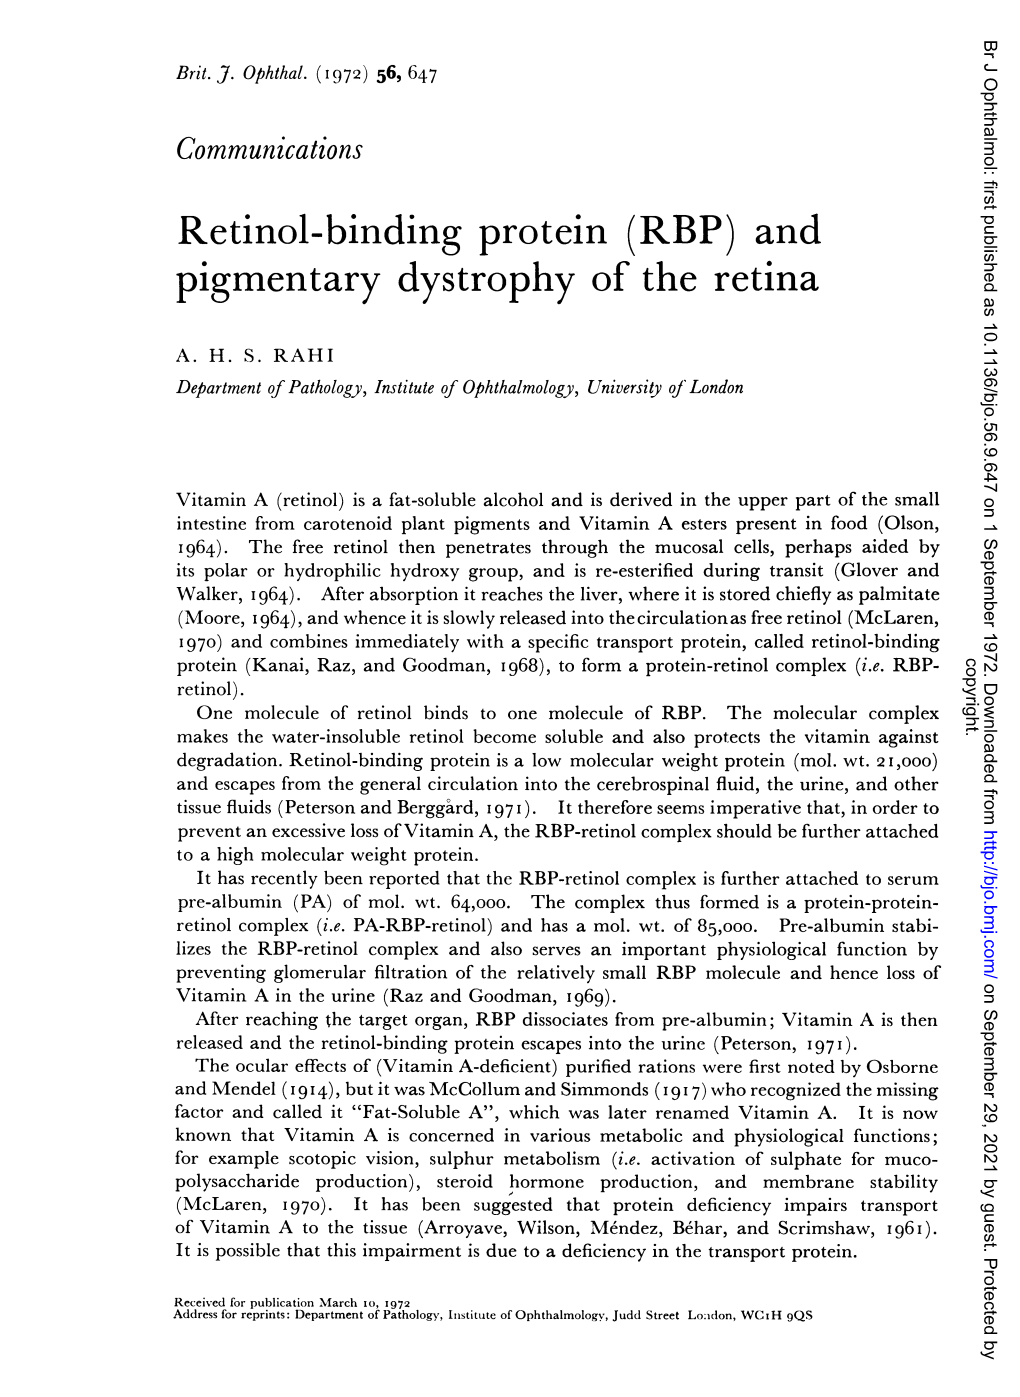 Retinol-Binding Protein (RBP) and Pigmentary Dystrophy of the Retina